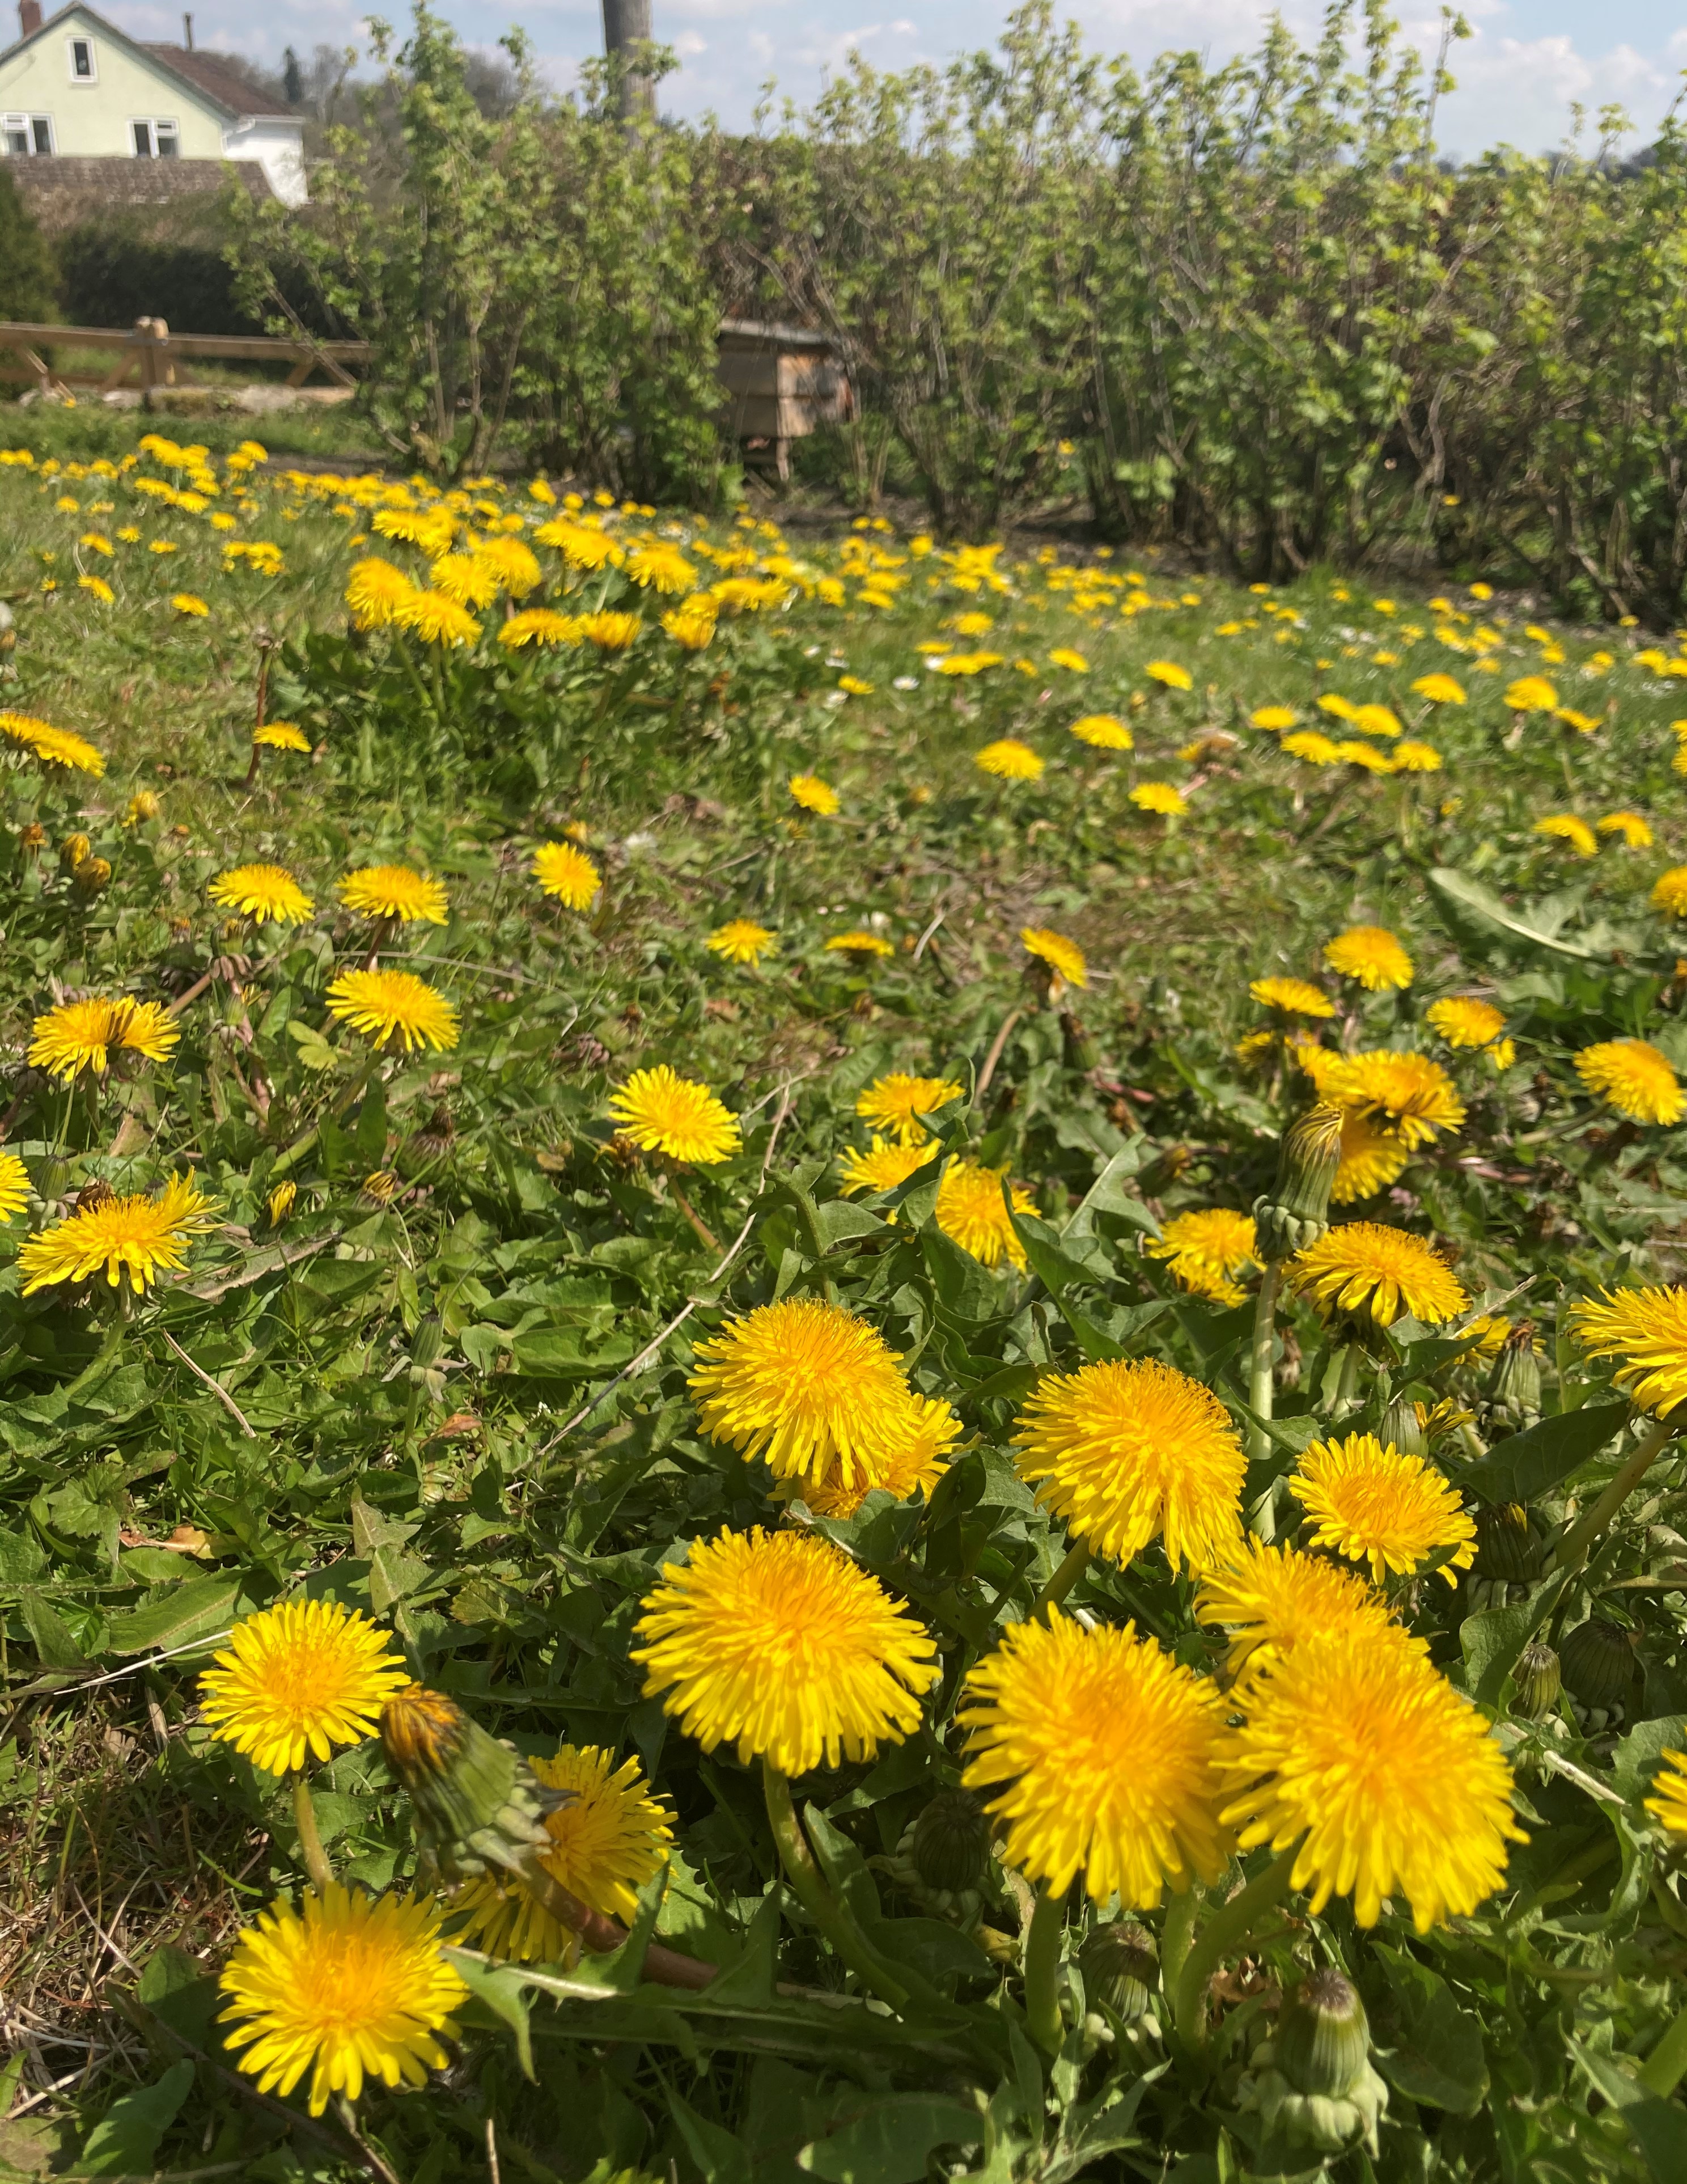 Dandelions in a garden lawn (Archie Thomas/Plantlife/PA)